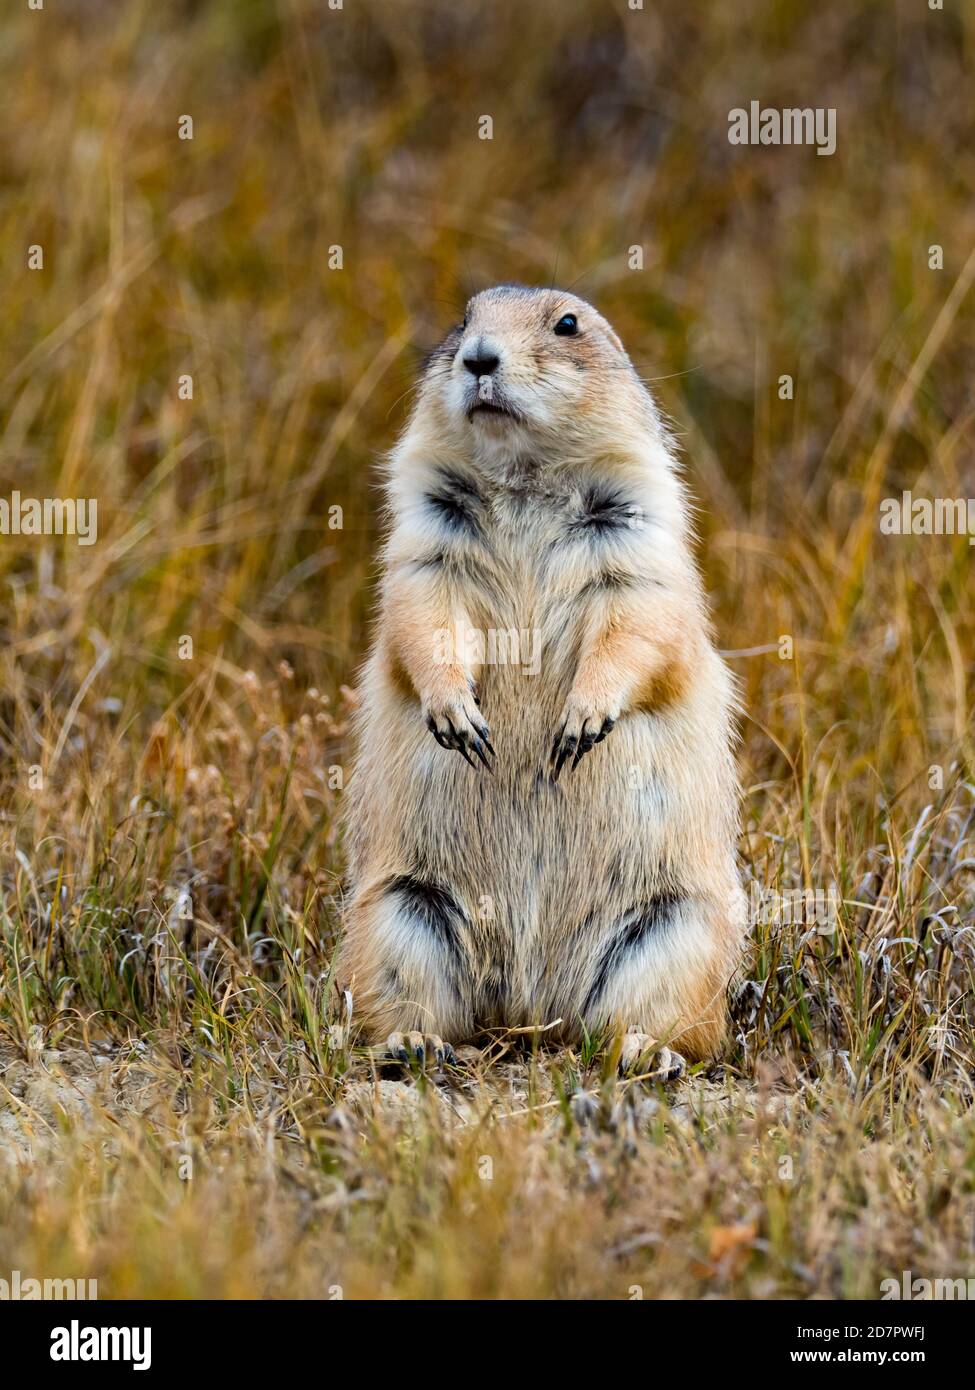 The black-tailed prairie dog, Cynomys ludovicianus, in the badlands of Theodore Roosevelt National Park, North Dakota, USA Stock Photo